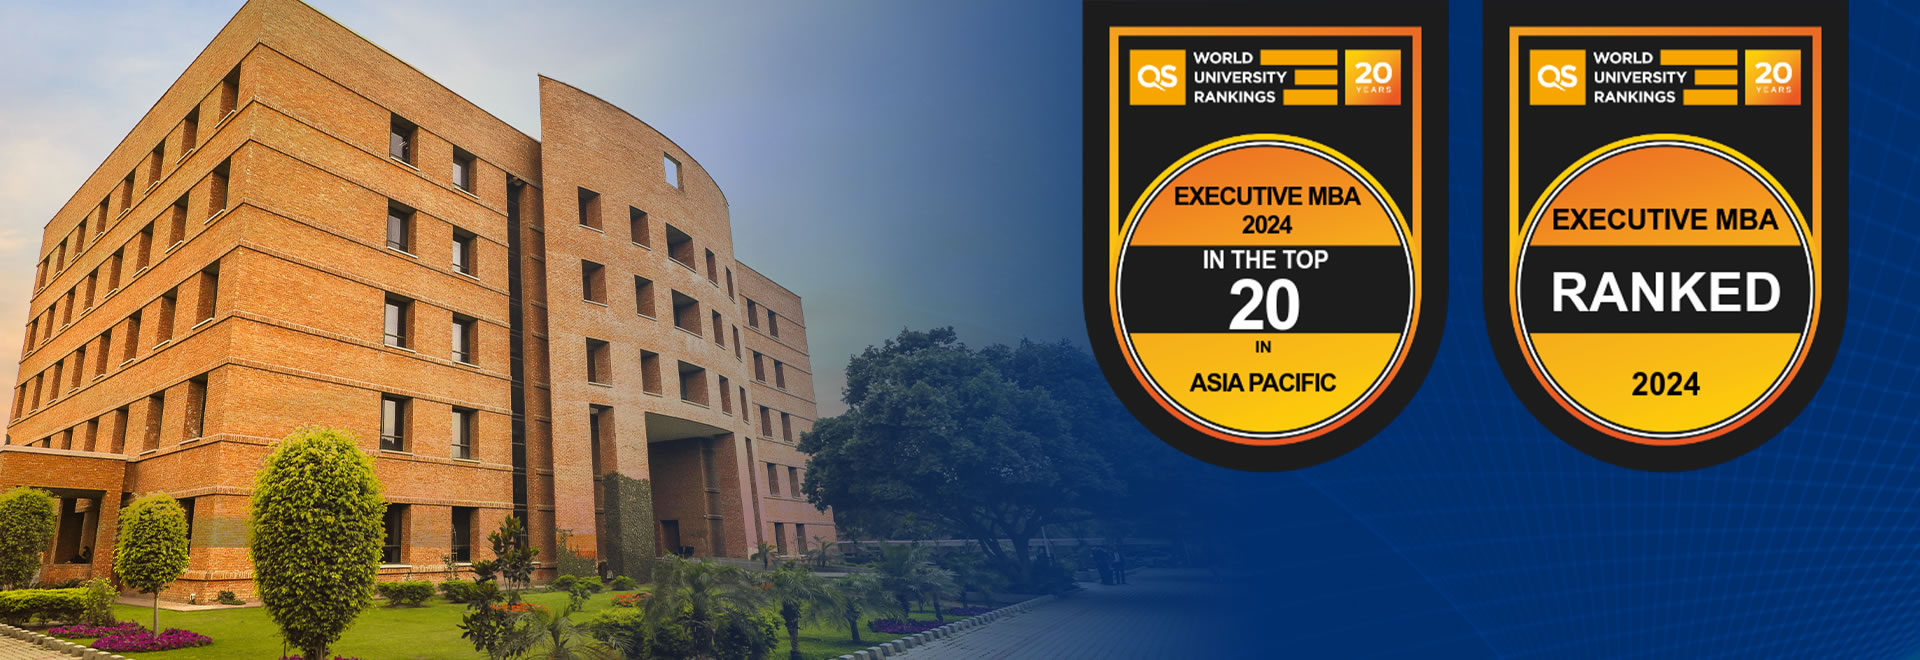 LUMS' Executive MBA Programme Soars in Global QS Rankings